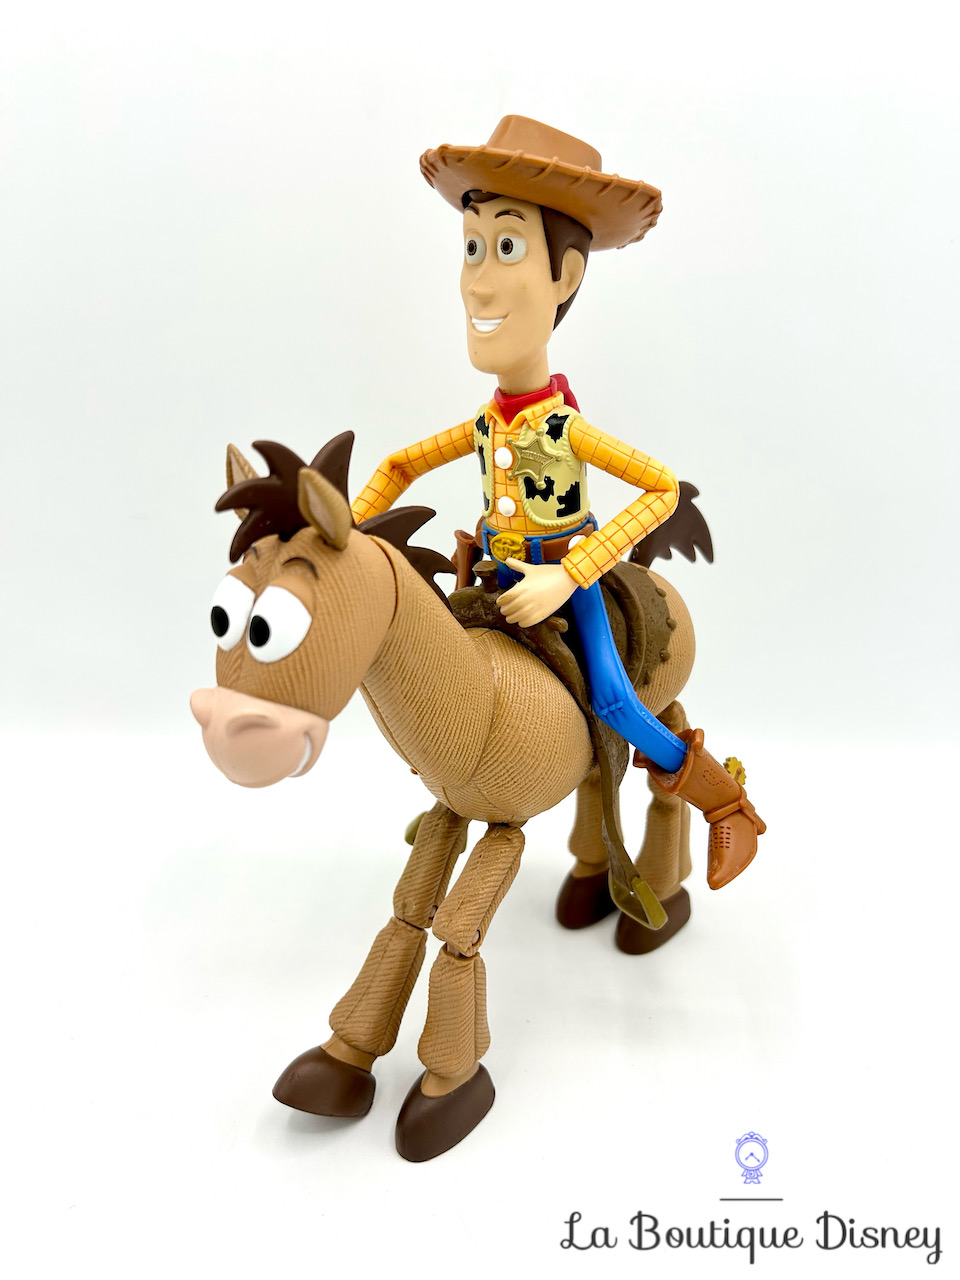 Jouet Figurines Woody Pile Poil Pack Aventures Toy Story 4 Disney Mattel cow boy cheval 17 cm